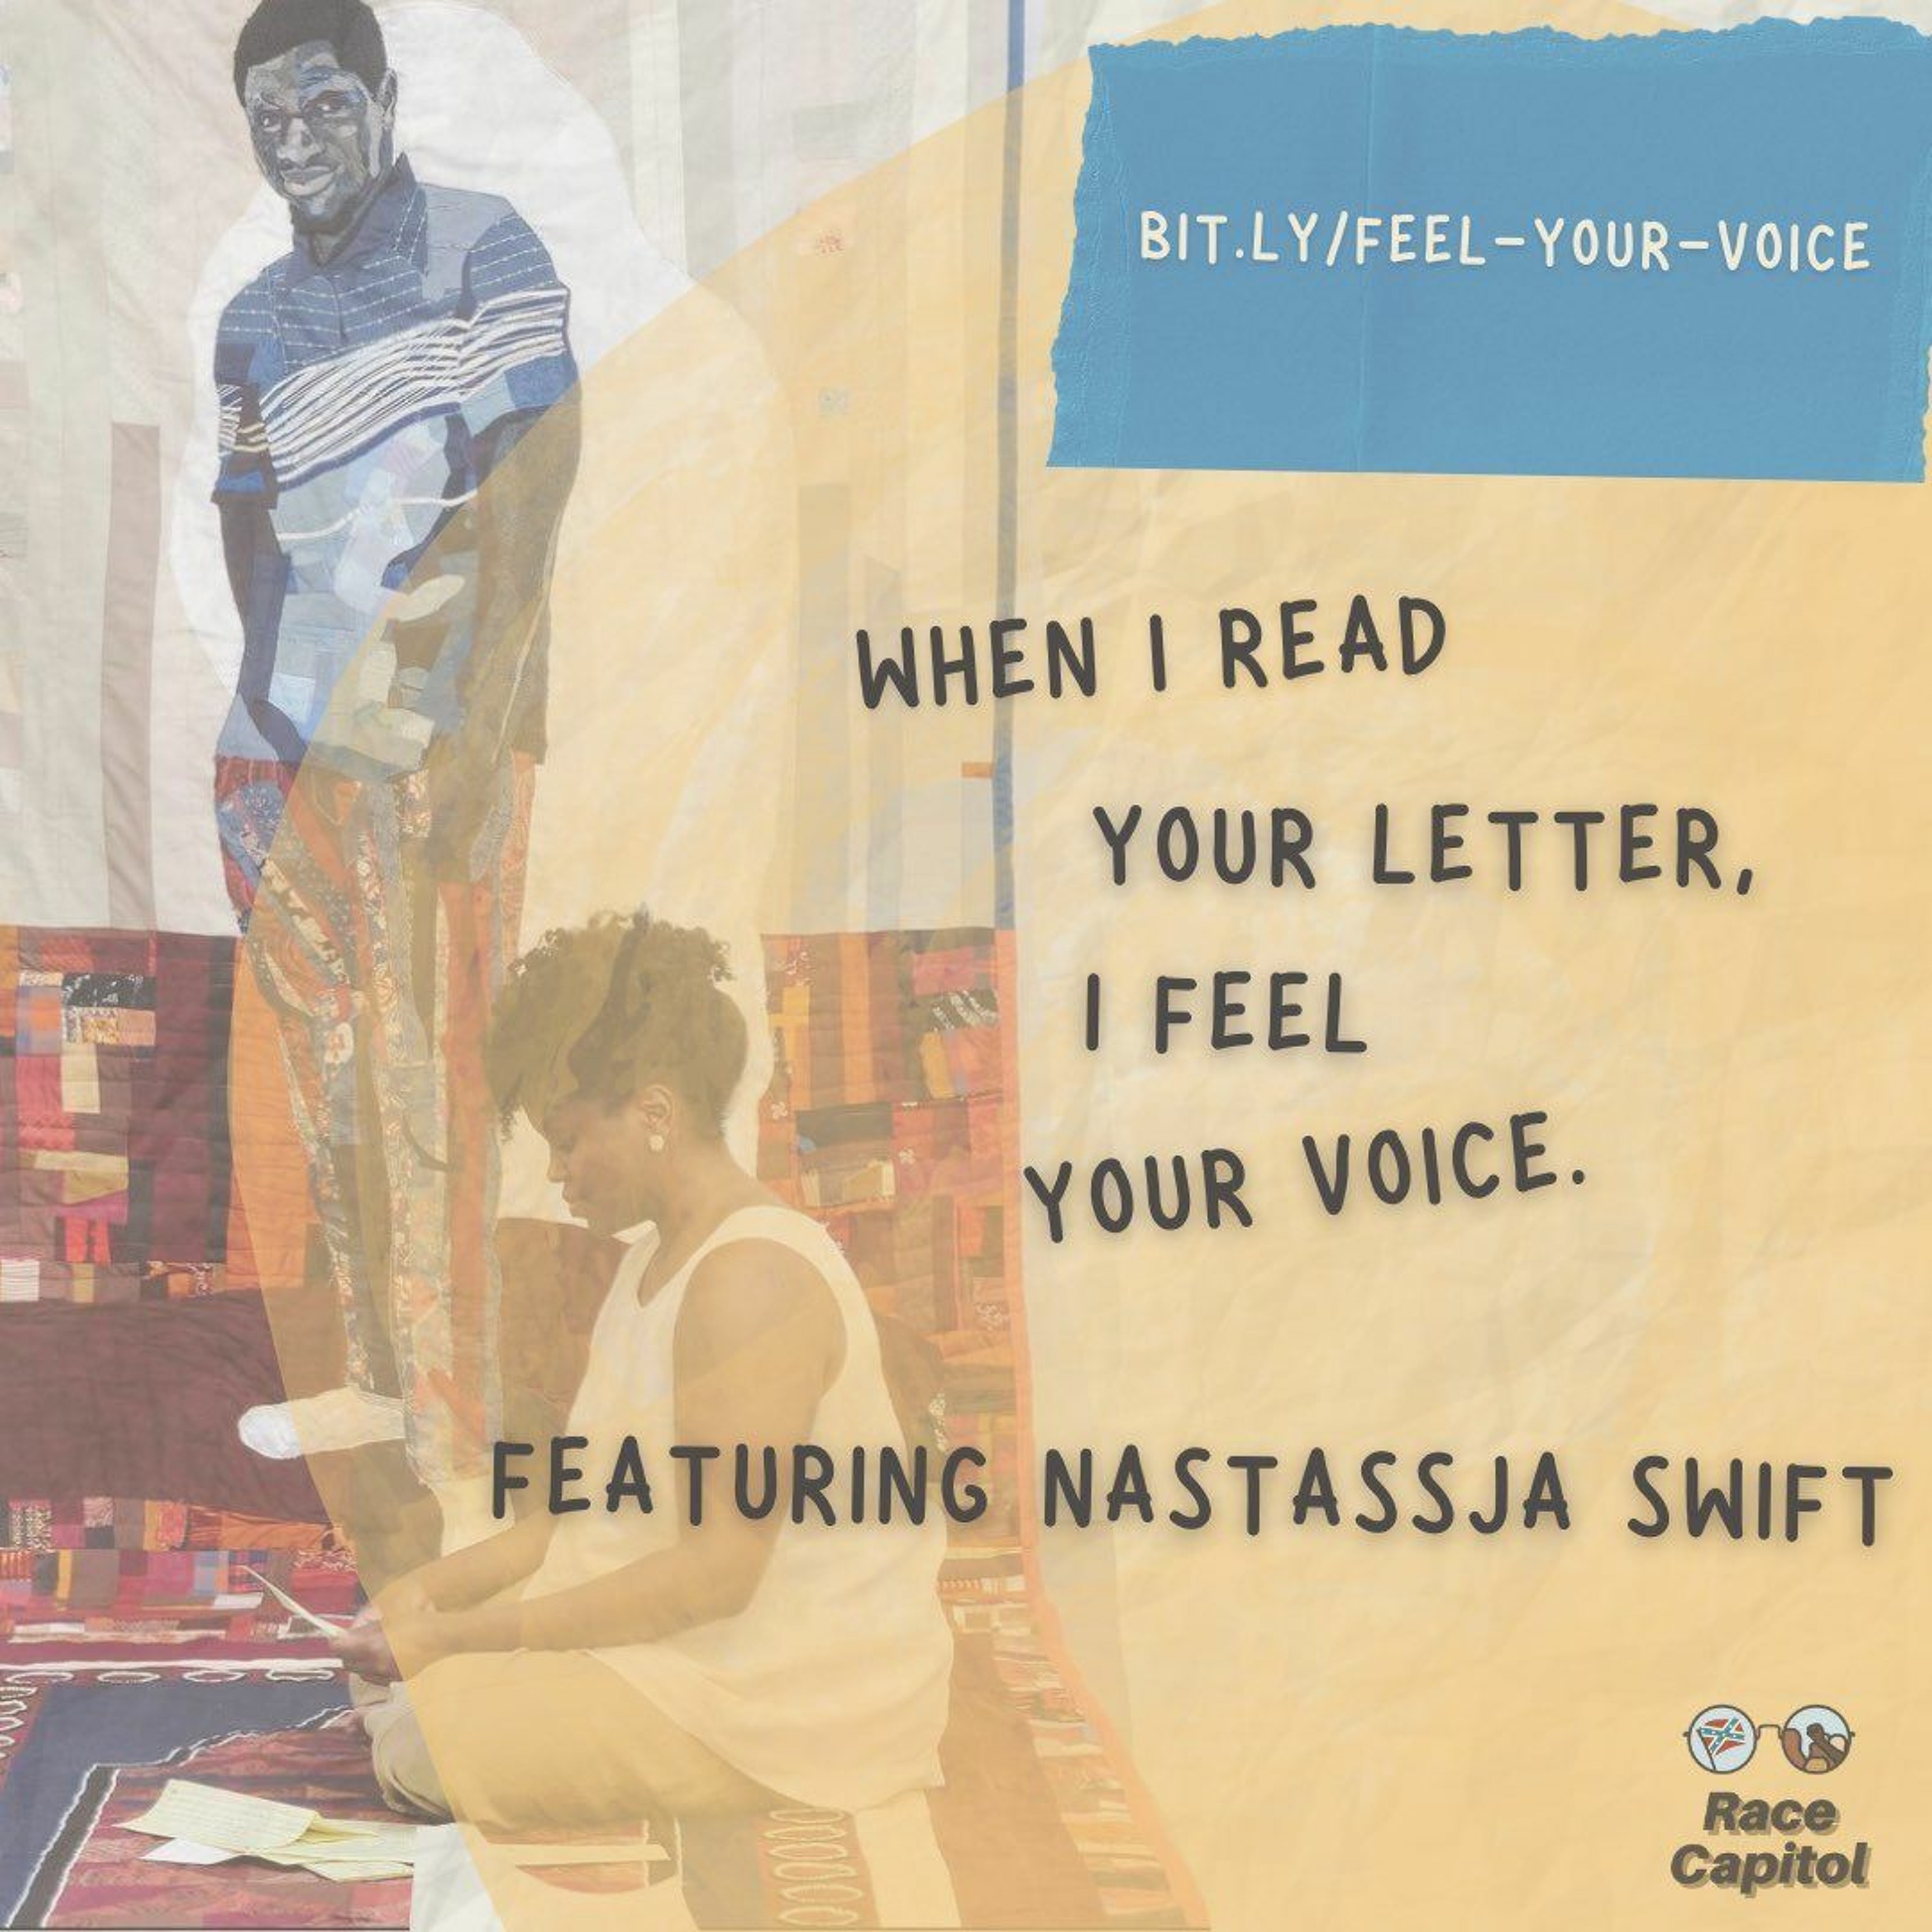 Canaan: when i read your letter, I feel your voice, with Nastassja Swift